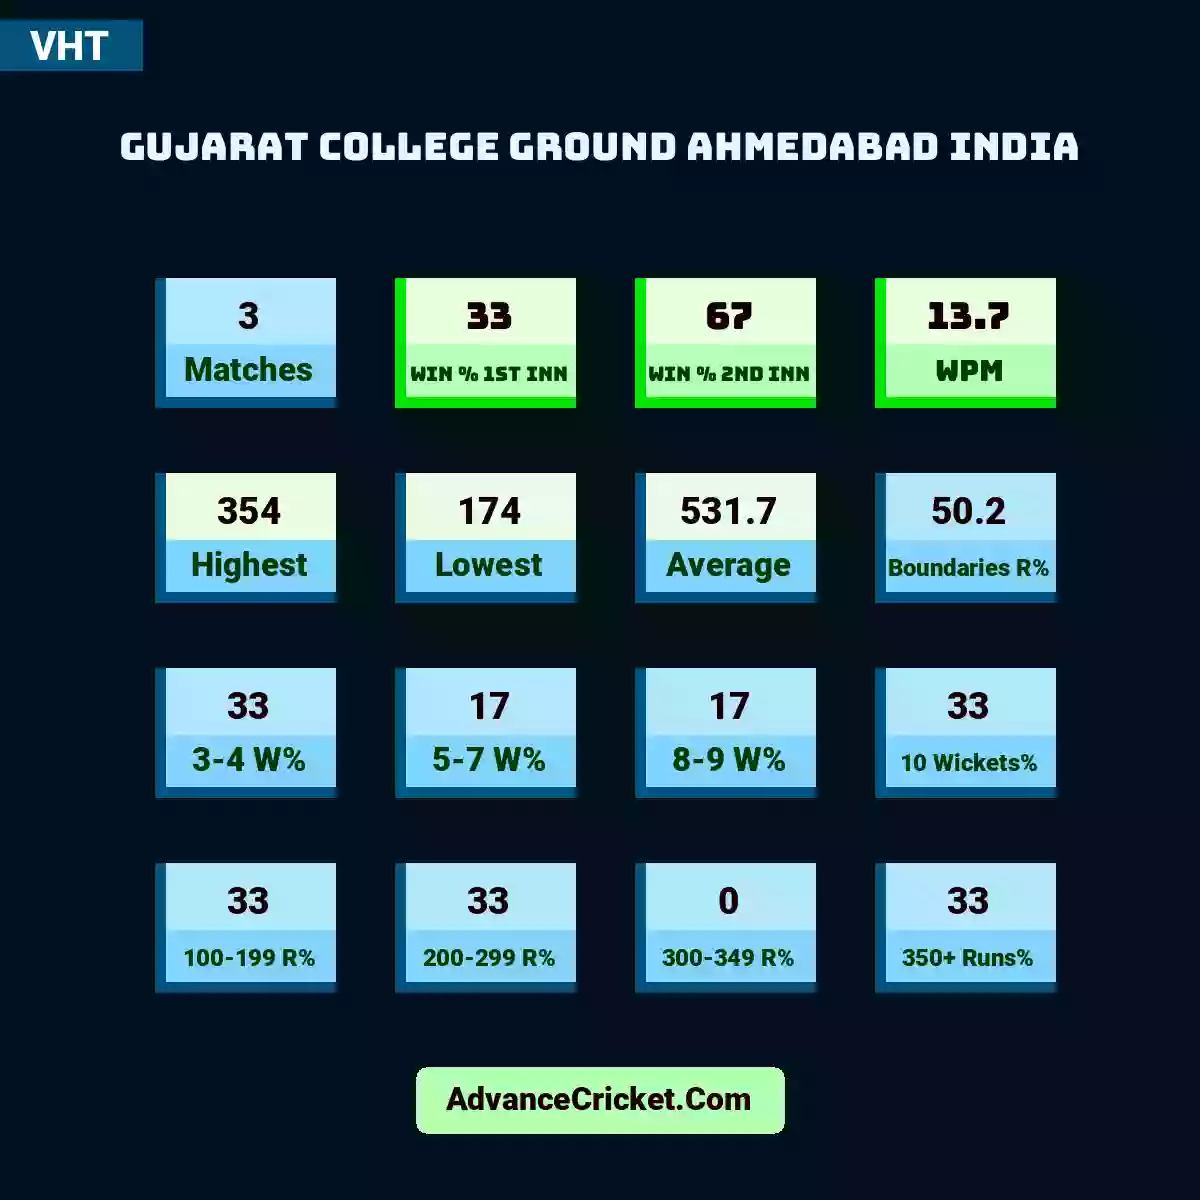 Image showing Gujarat College Ground Ahmedabad India with Matches: 3, Win % 1st Inn: 33, Win % 2nd Inn: 67, WPM: 13.7, Highest: 354, Lowest: 174, Average: 531.7, Boundaries R%: 50.2, 3-4 W%: 33, 5-7 W%: 17, 8-9 W%: 17, 10 Wickets%: 33, 100-199 R%: 33, 200-299 R%: 33, 300-349 R%: 0, 350+ Runs%: 33.